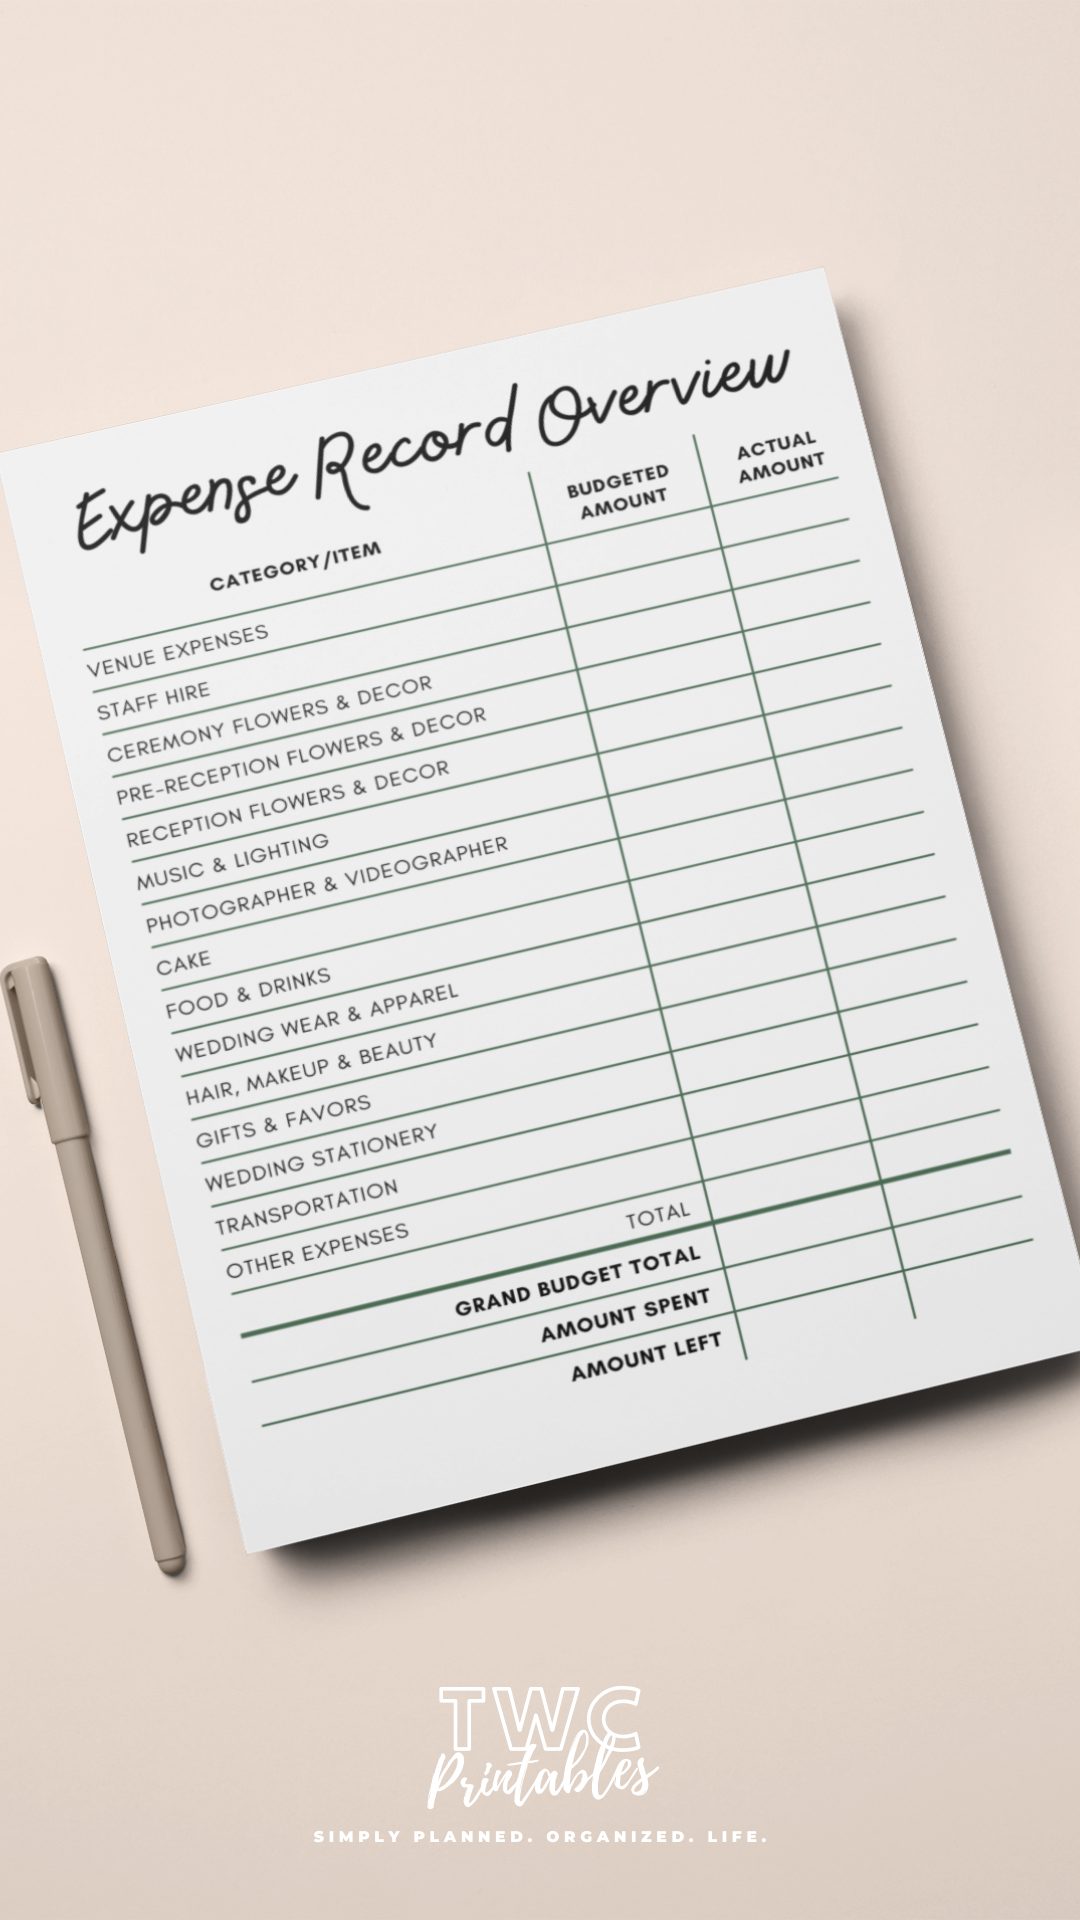 track your wedding expenses and costs - the wedding planner - 13 rules for styling your own wedding - The Wedding Club